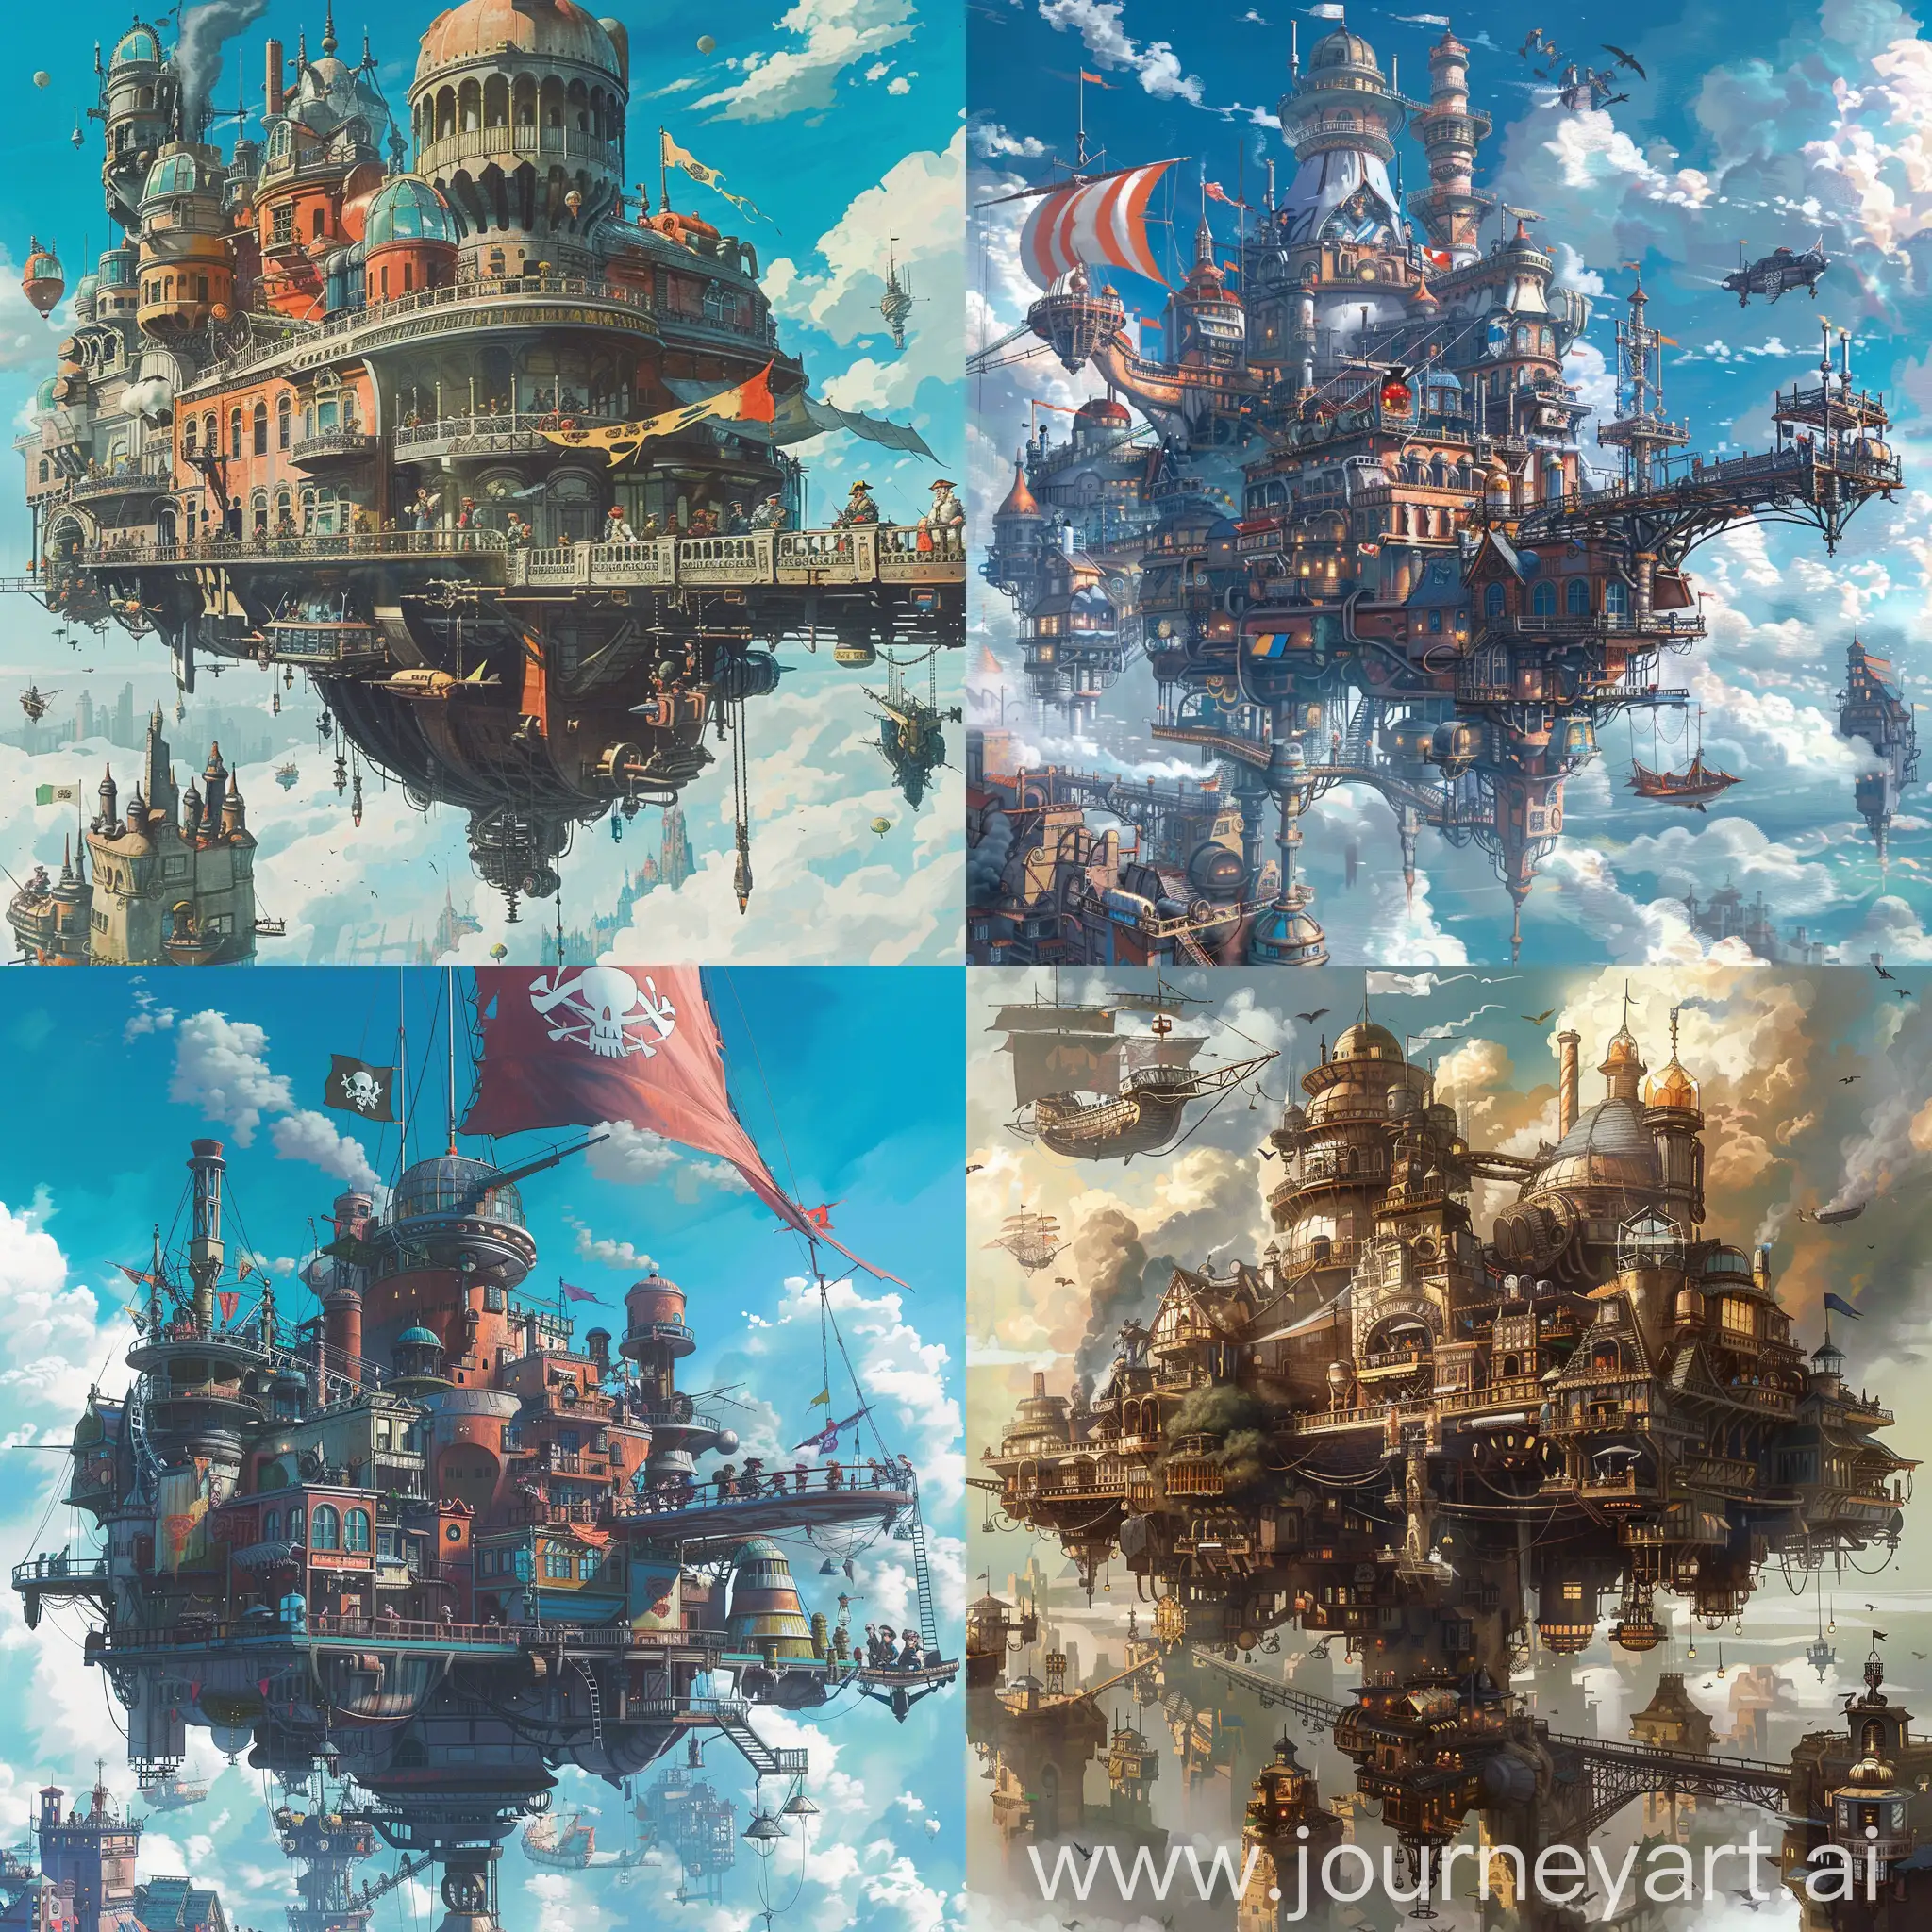 sky pirates hanging out in a flying steampunk city, comfy, Ghibli aesthetic